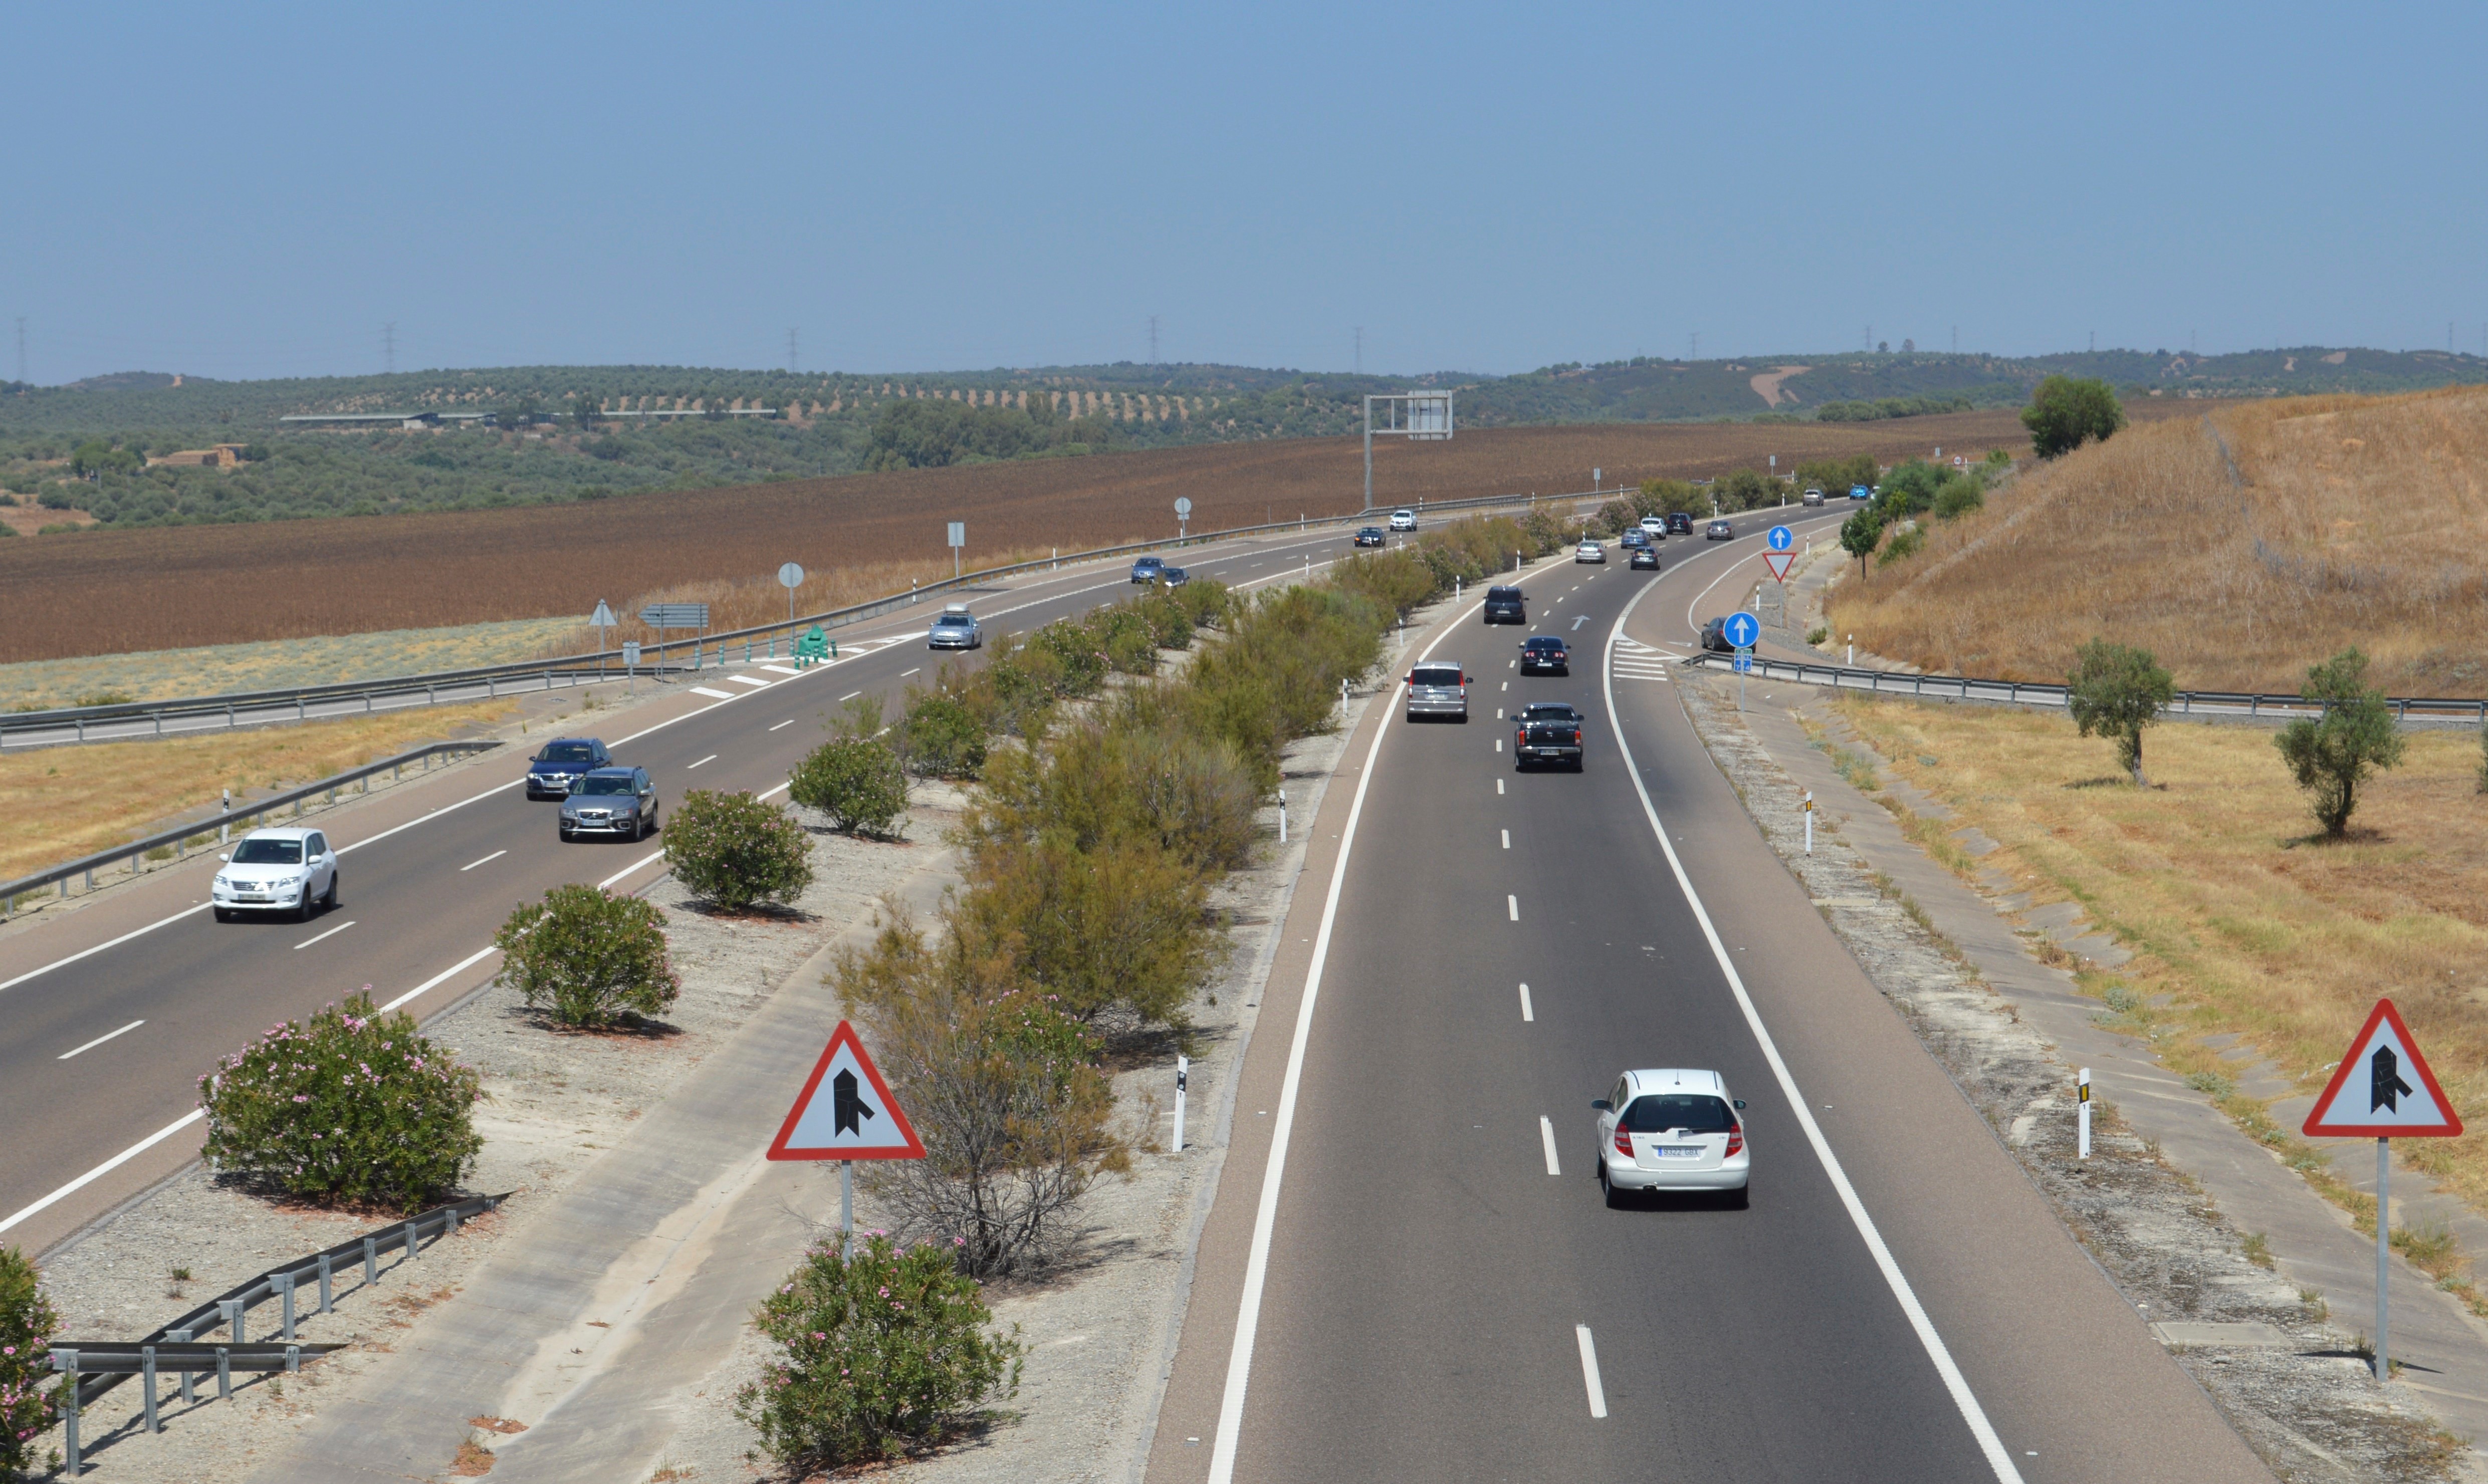 A66 Toll Road (Spain)